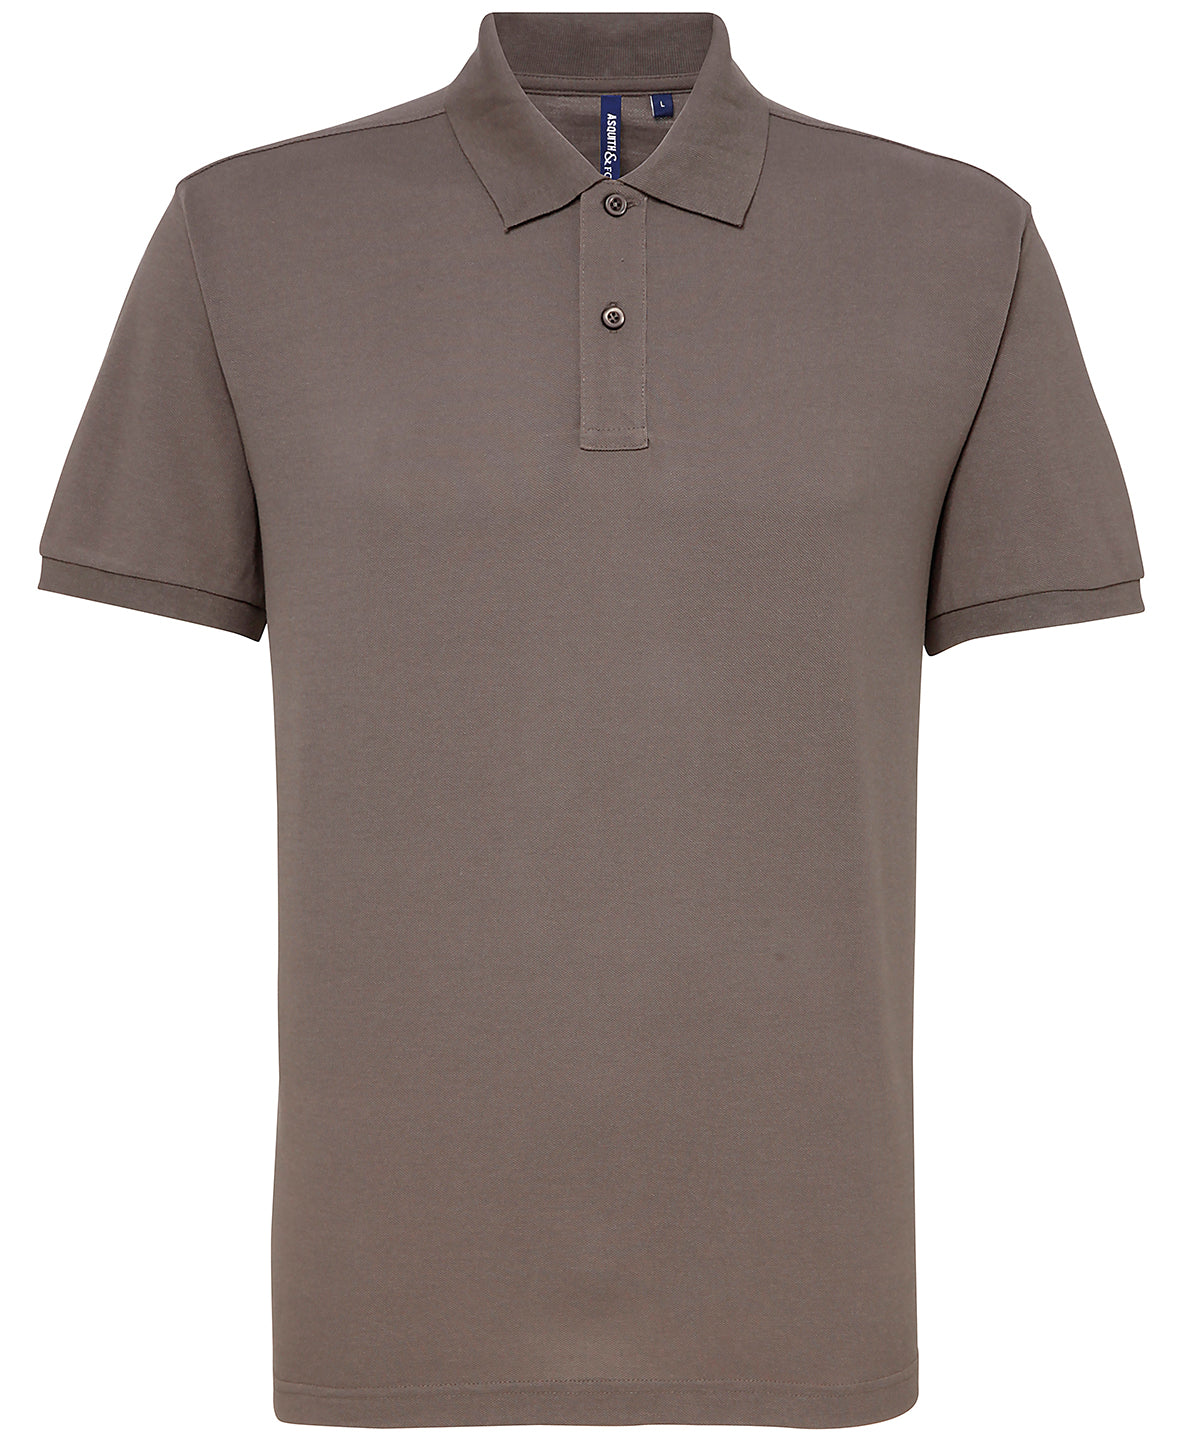 Personalised Polo Shirts - Burgundy Asquith & Fox Men’s polycotton blend polo